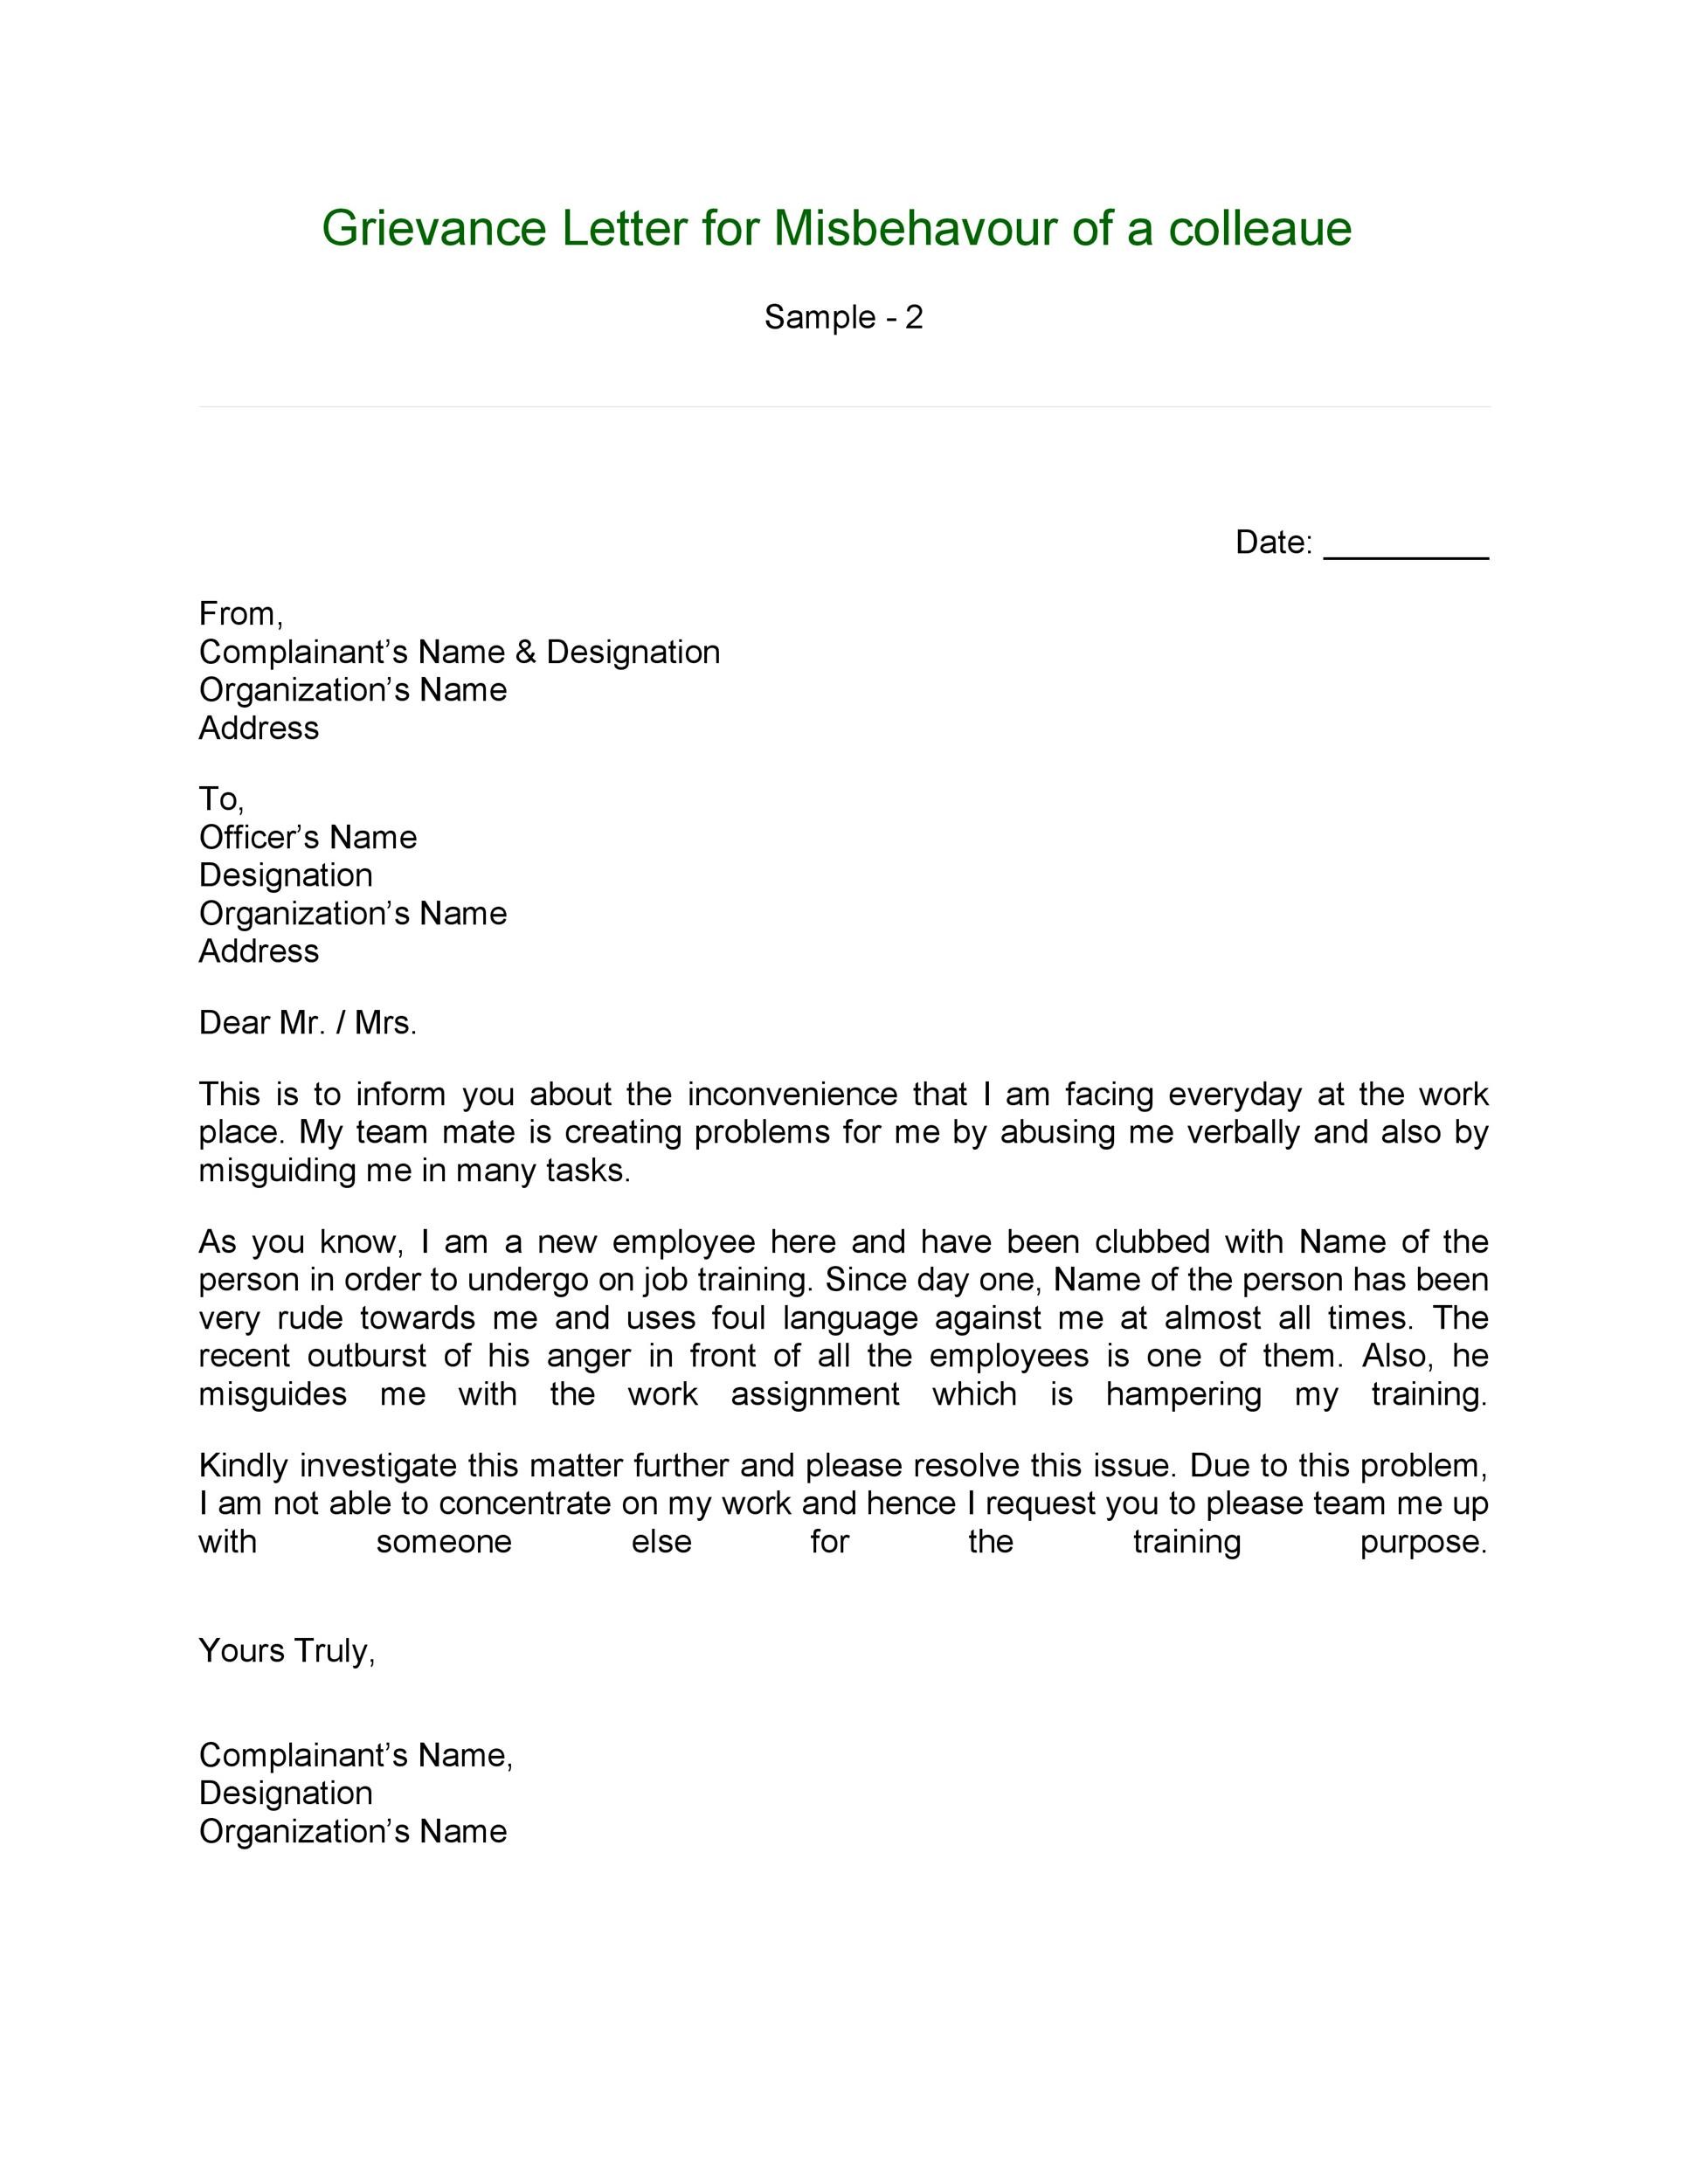 Union Grievance Response Letter from templatelab.com